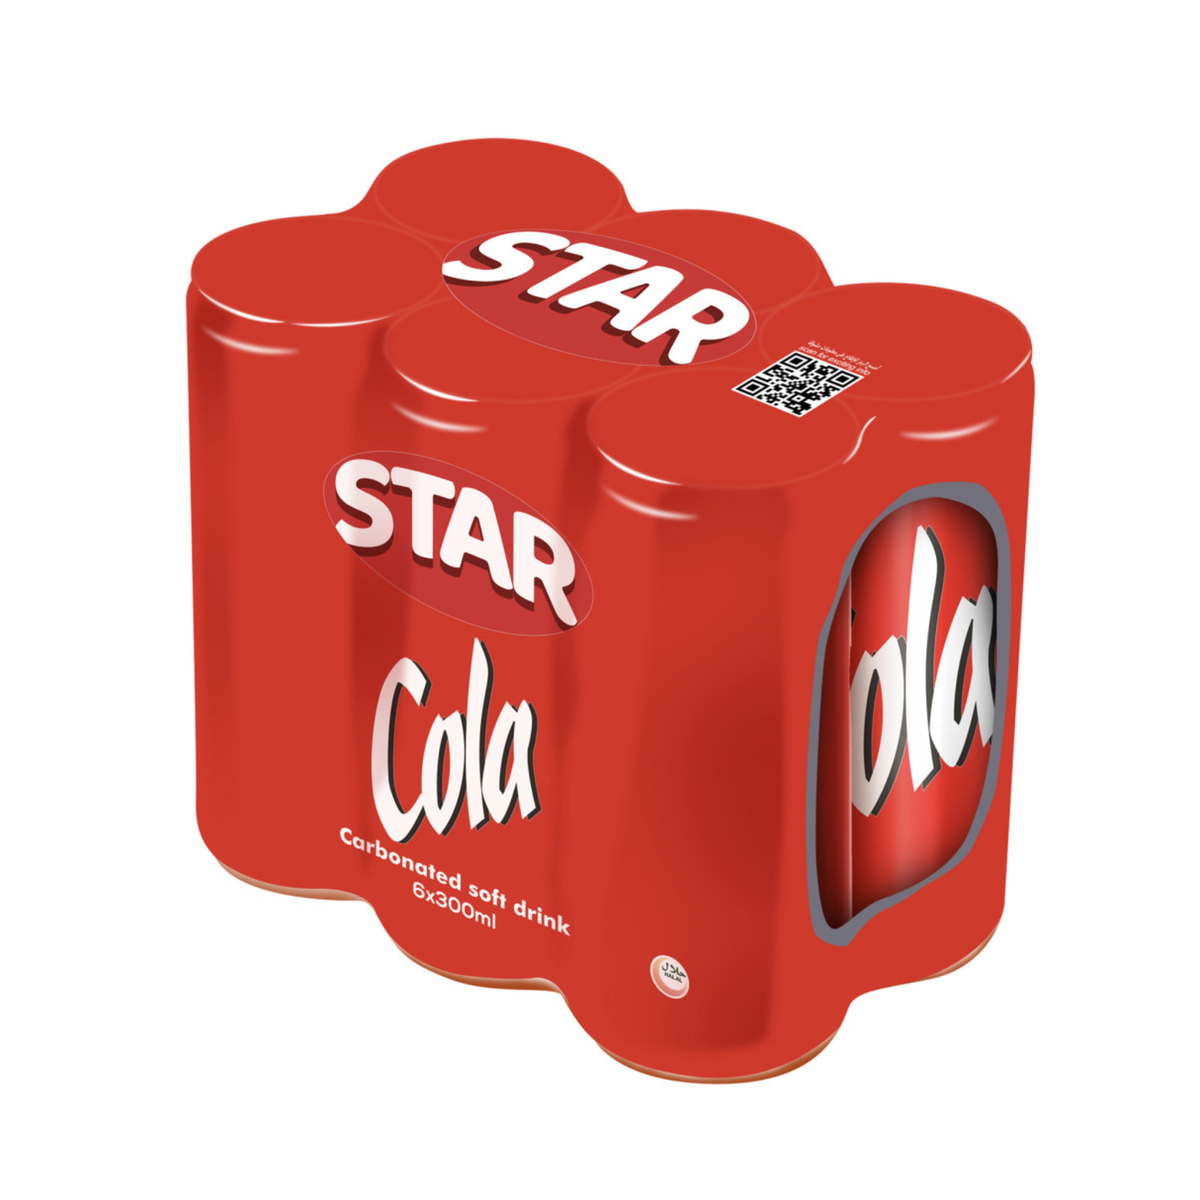 Star Cola Carbonated Soft Drink 300 ml